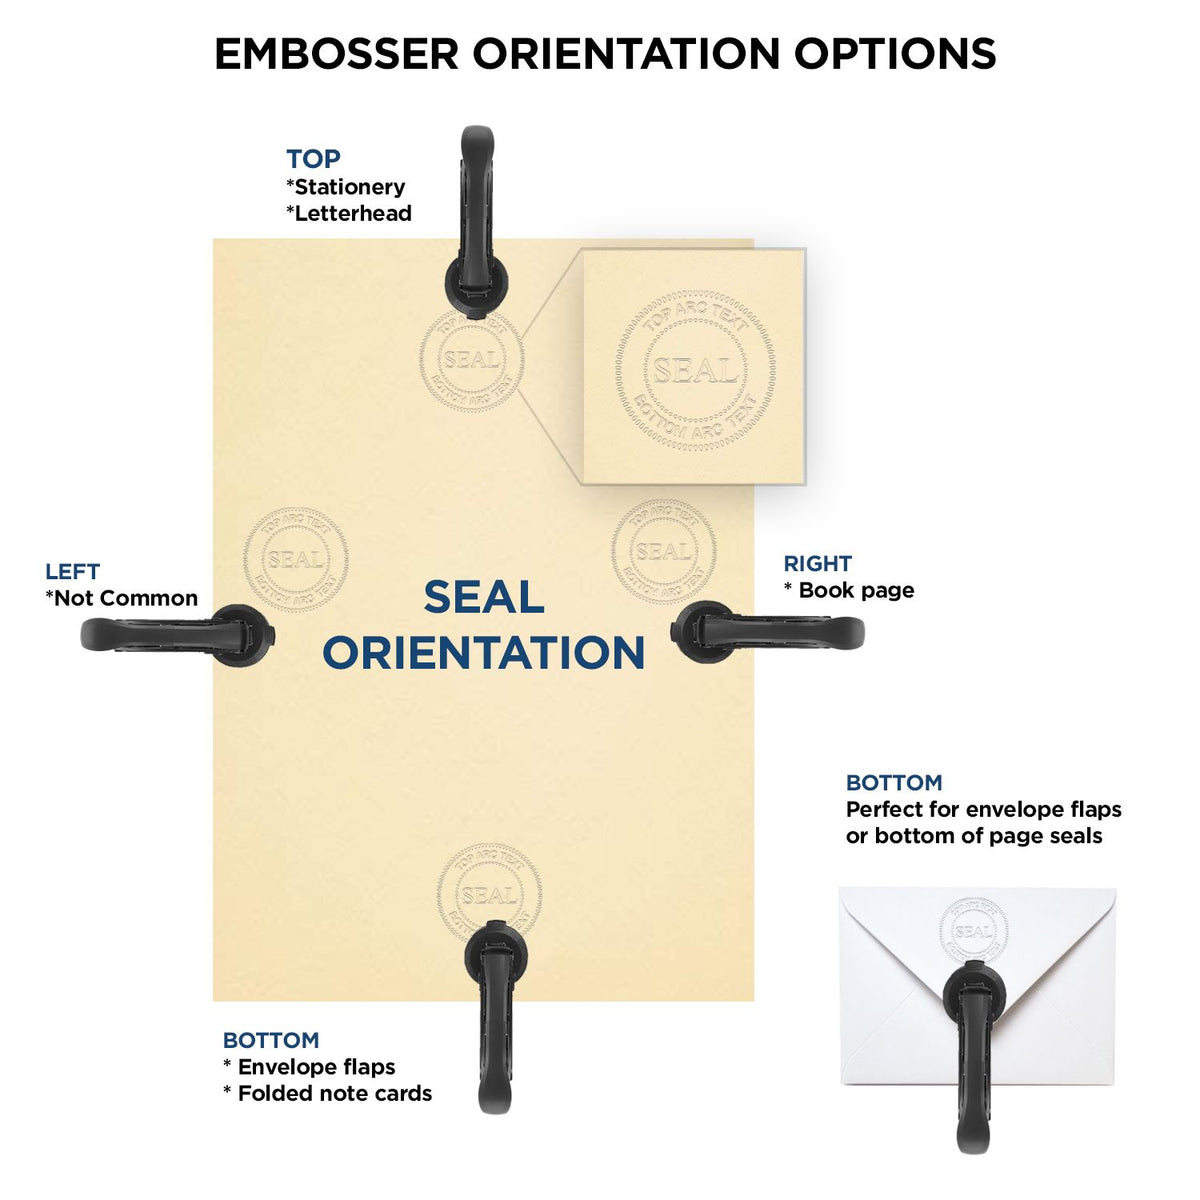 An infographic for the Extended Long Reach Arizona Surveyor Embosser showing embosser orientation, this is showing examples of a top, bottom, right and left insert.